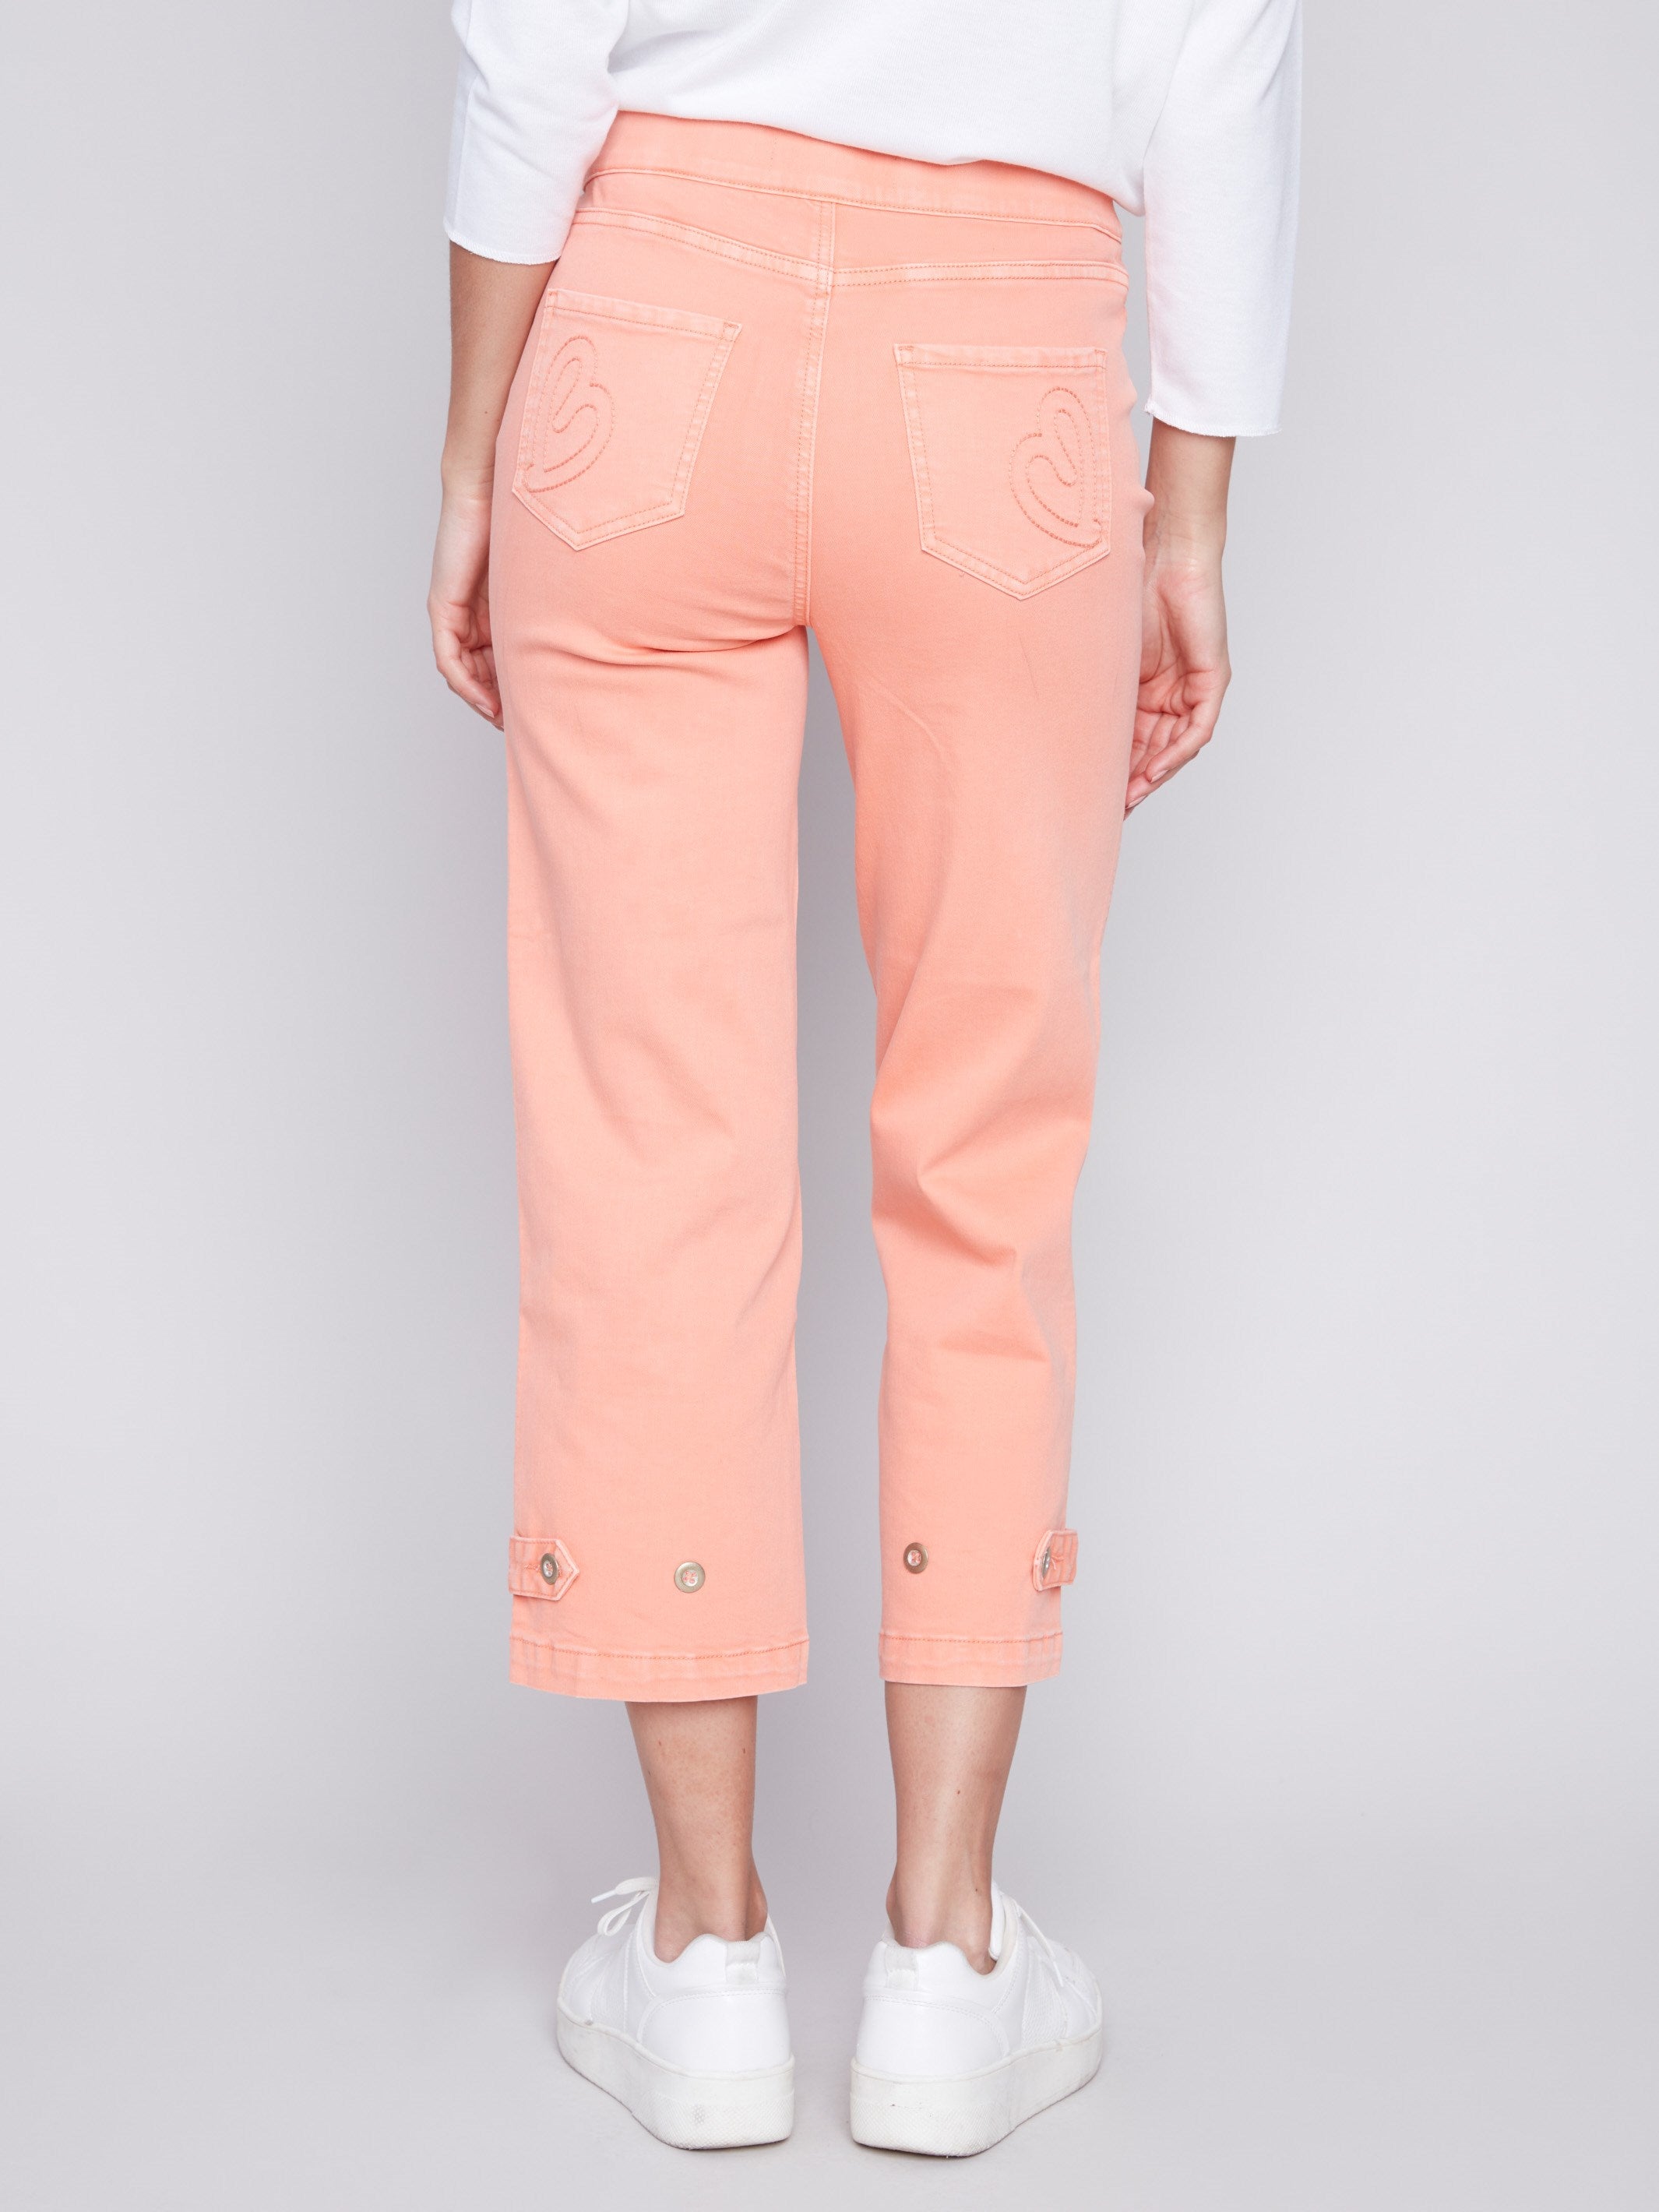 Cropped Pull-On Twill Pants with Hem Tab - Tangerine - Charlie B Collection Canada - Image 3